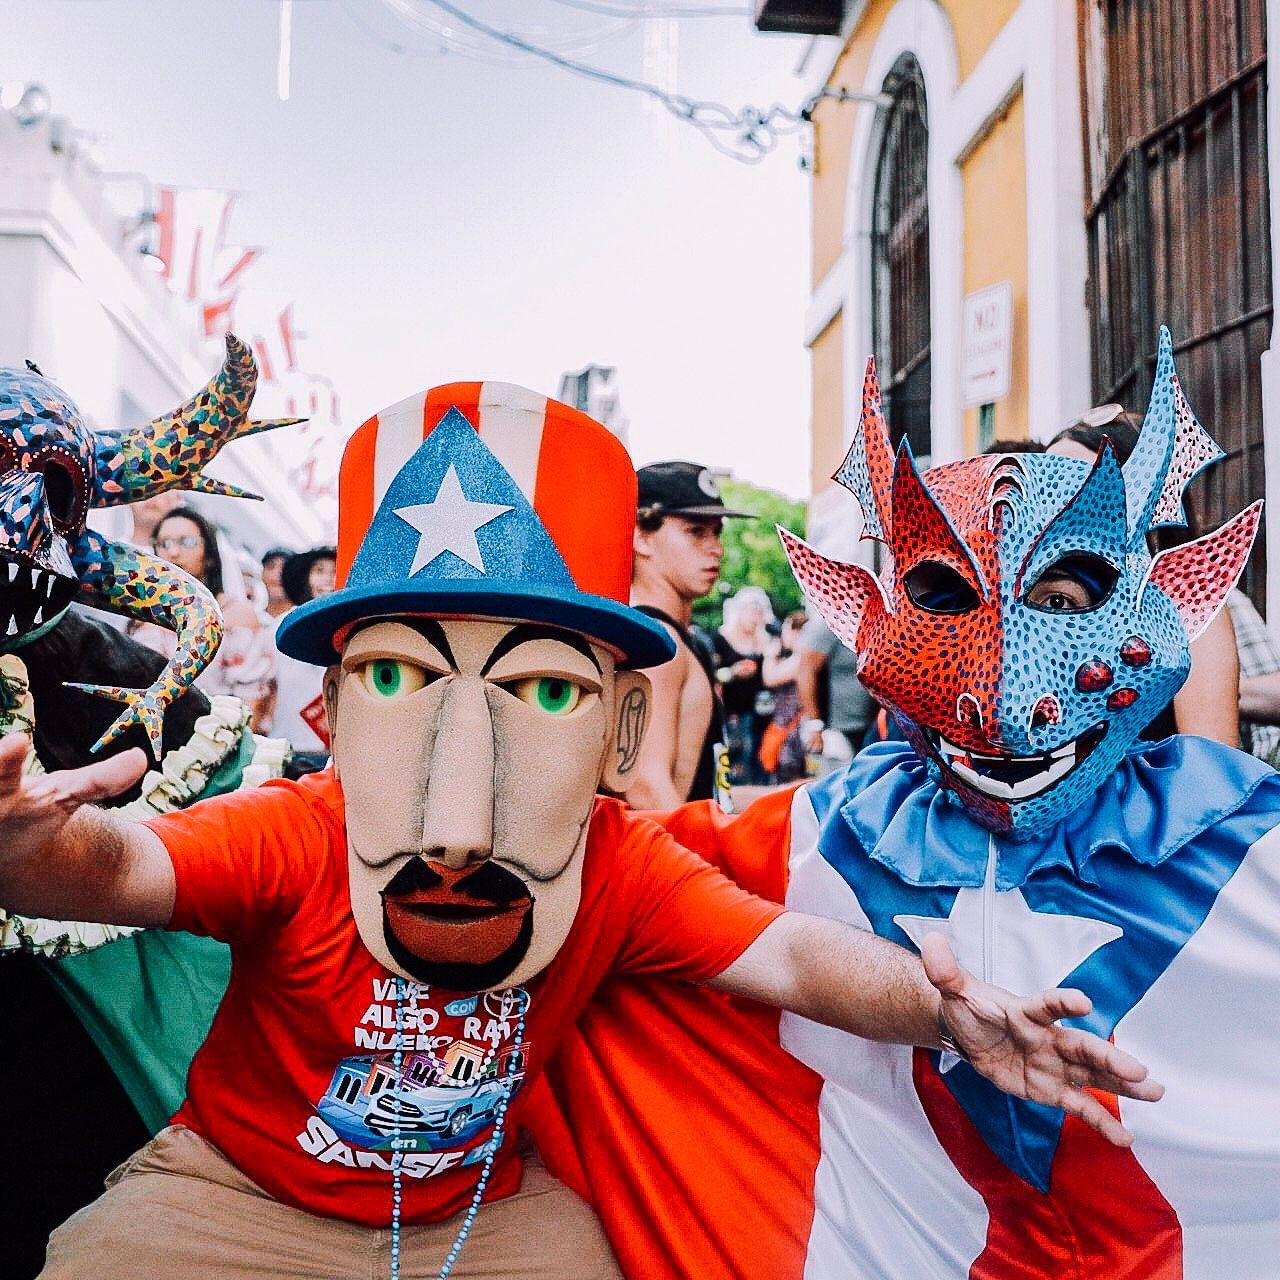 Festival of Calle San Sebastian with people in masks and costumes